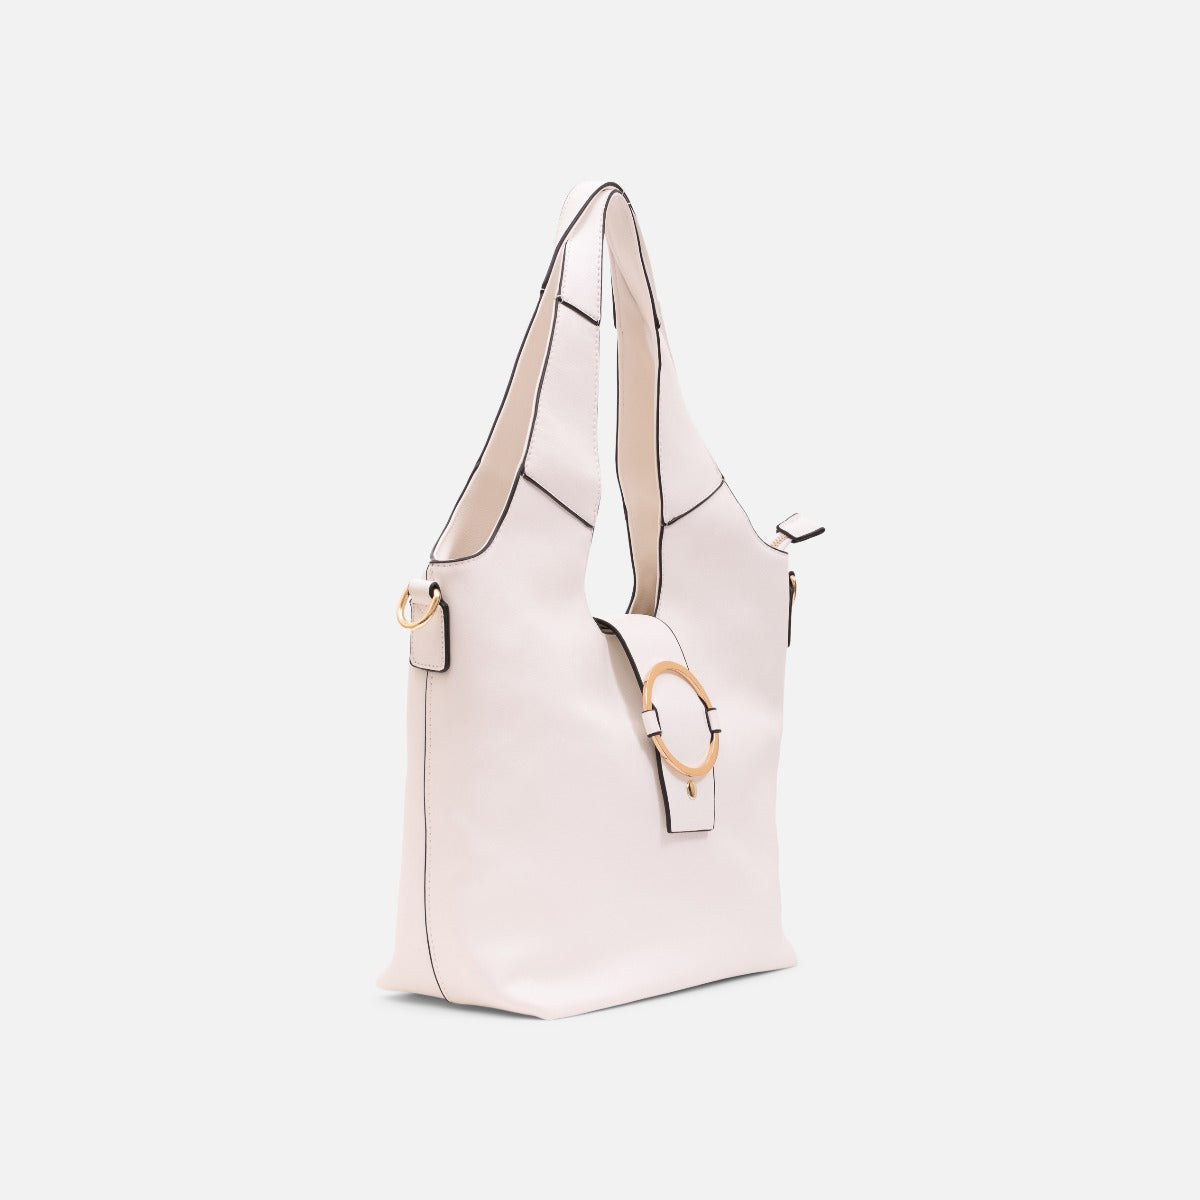 White bag with golden ring clasp press stud flap